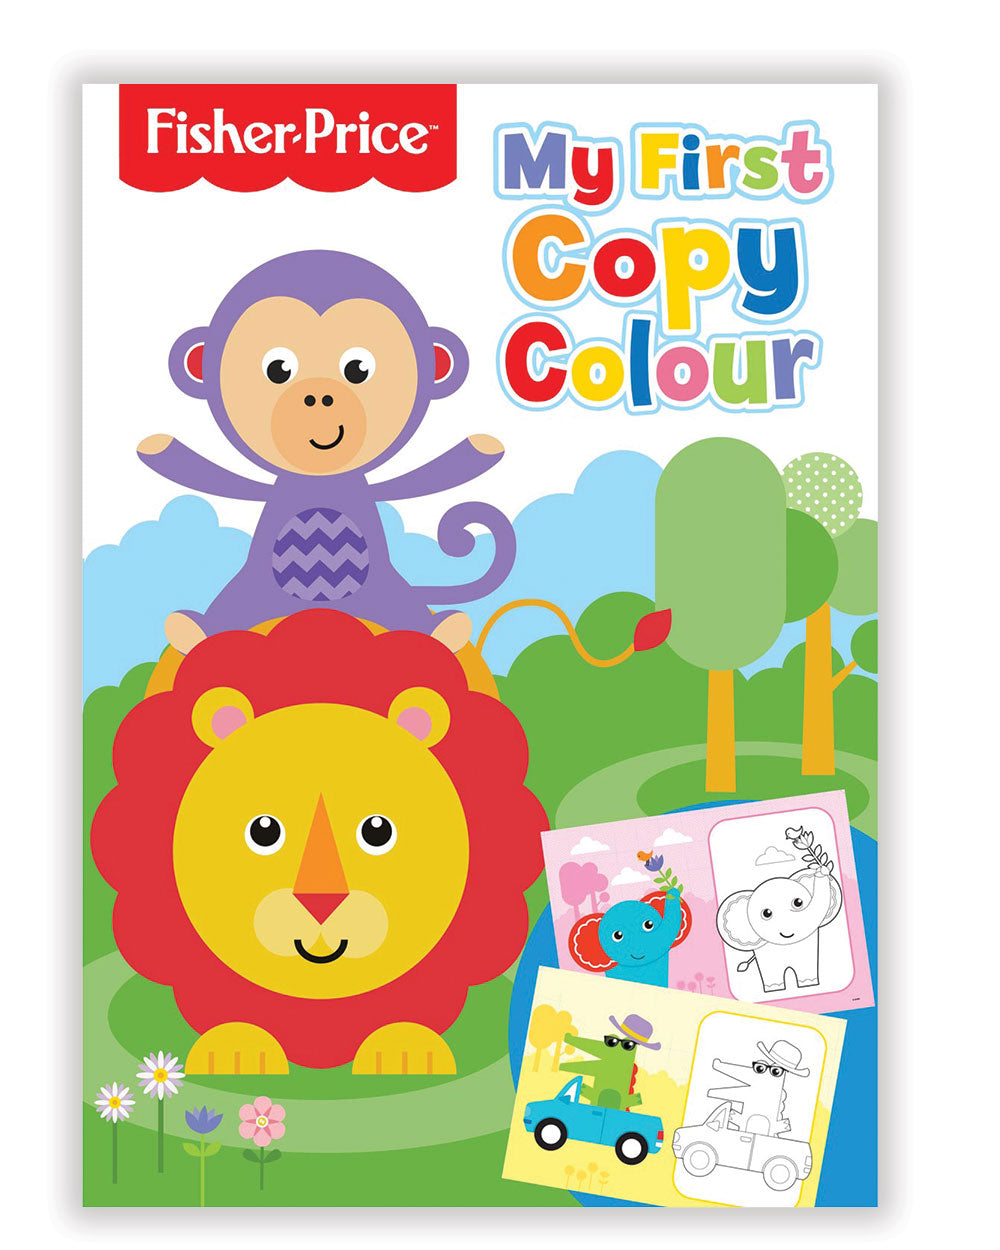 Fisher Price my first copy colour book colouring book children kids activity front cover on a white plain background